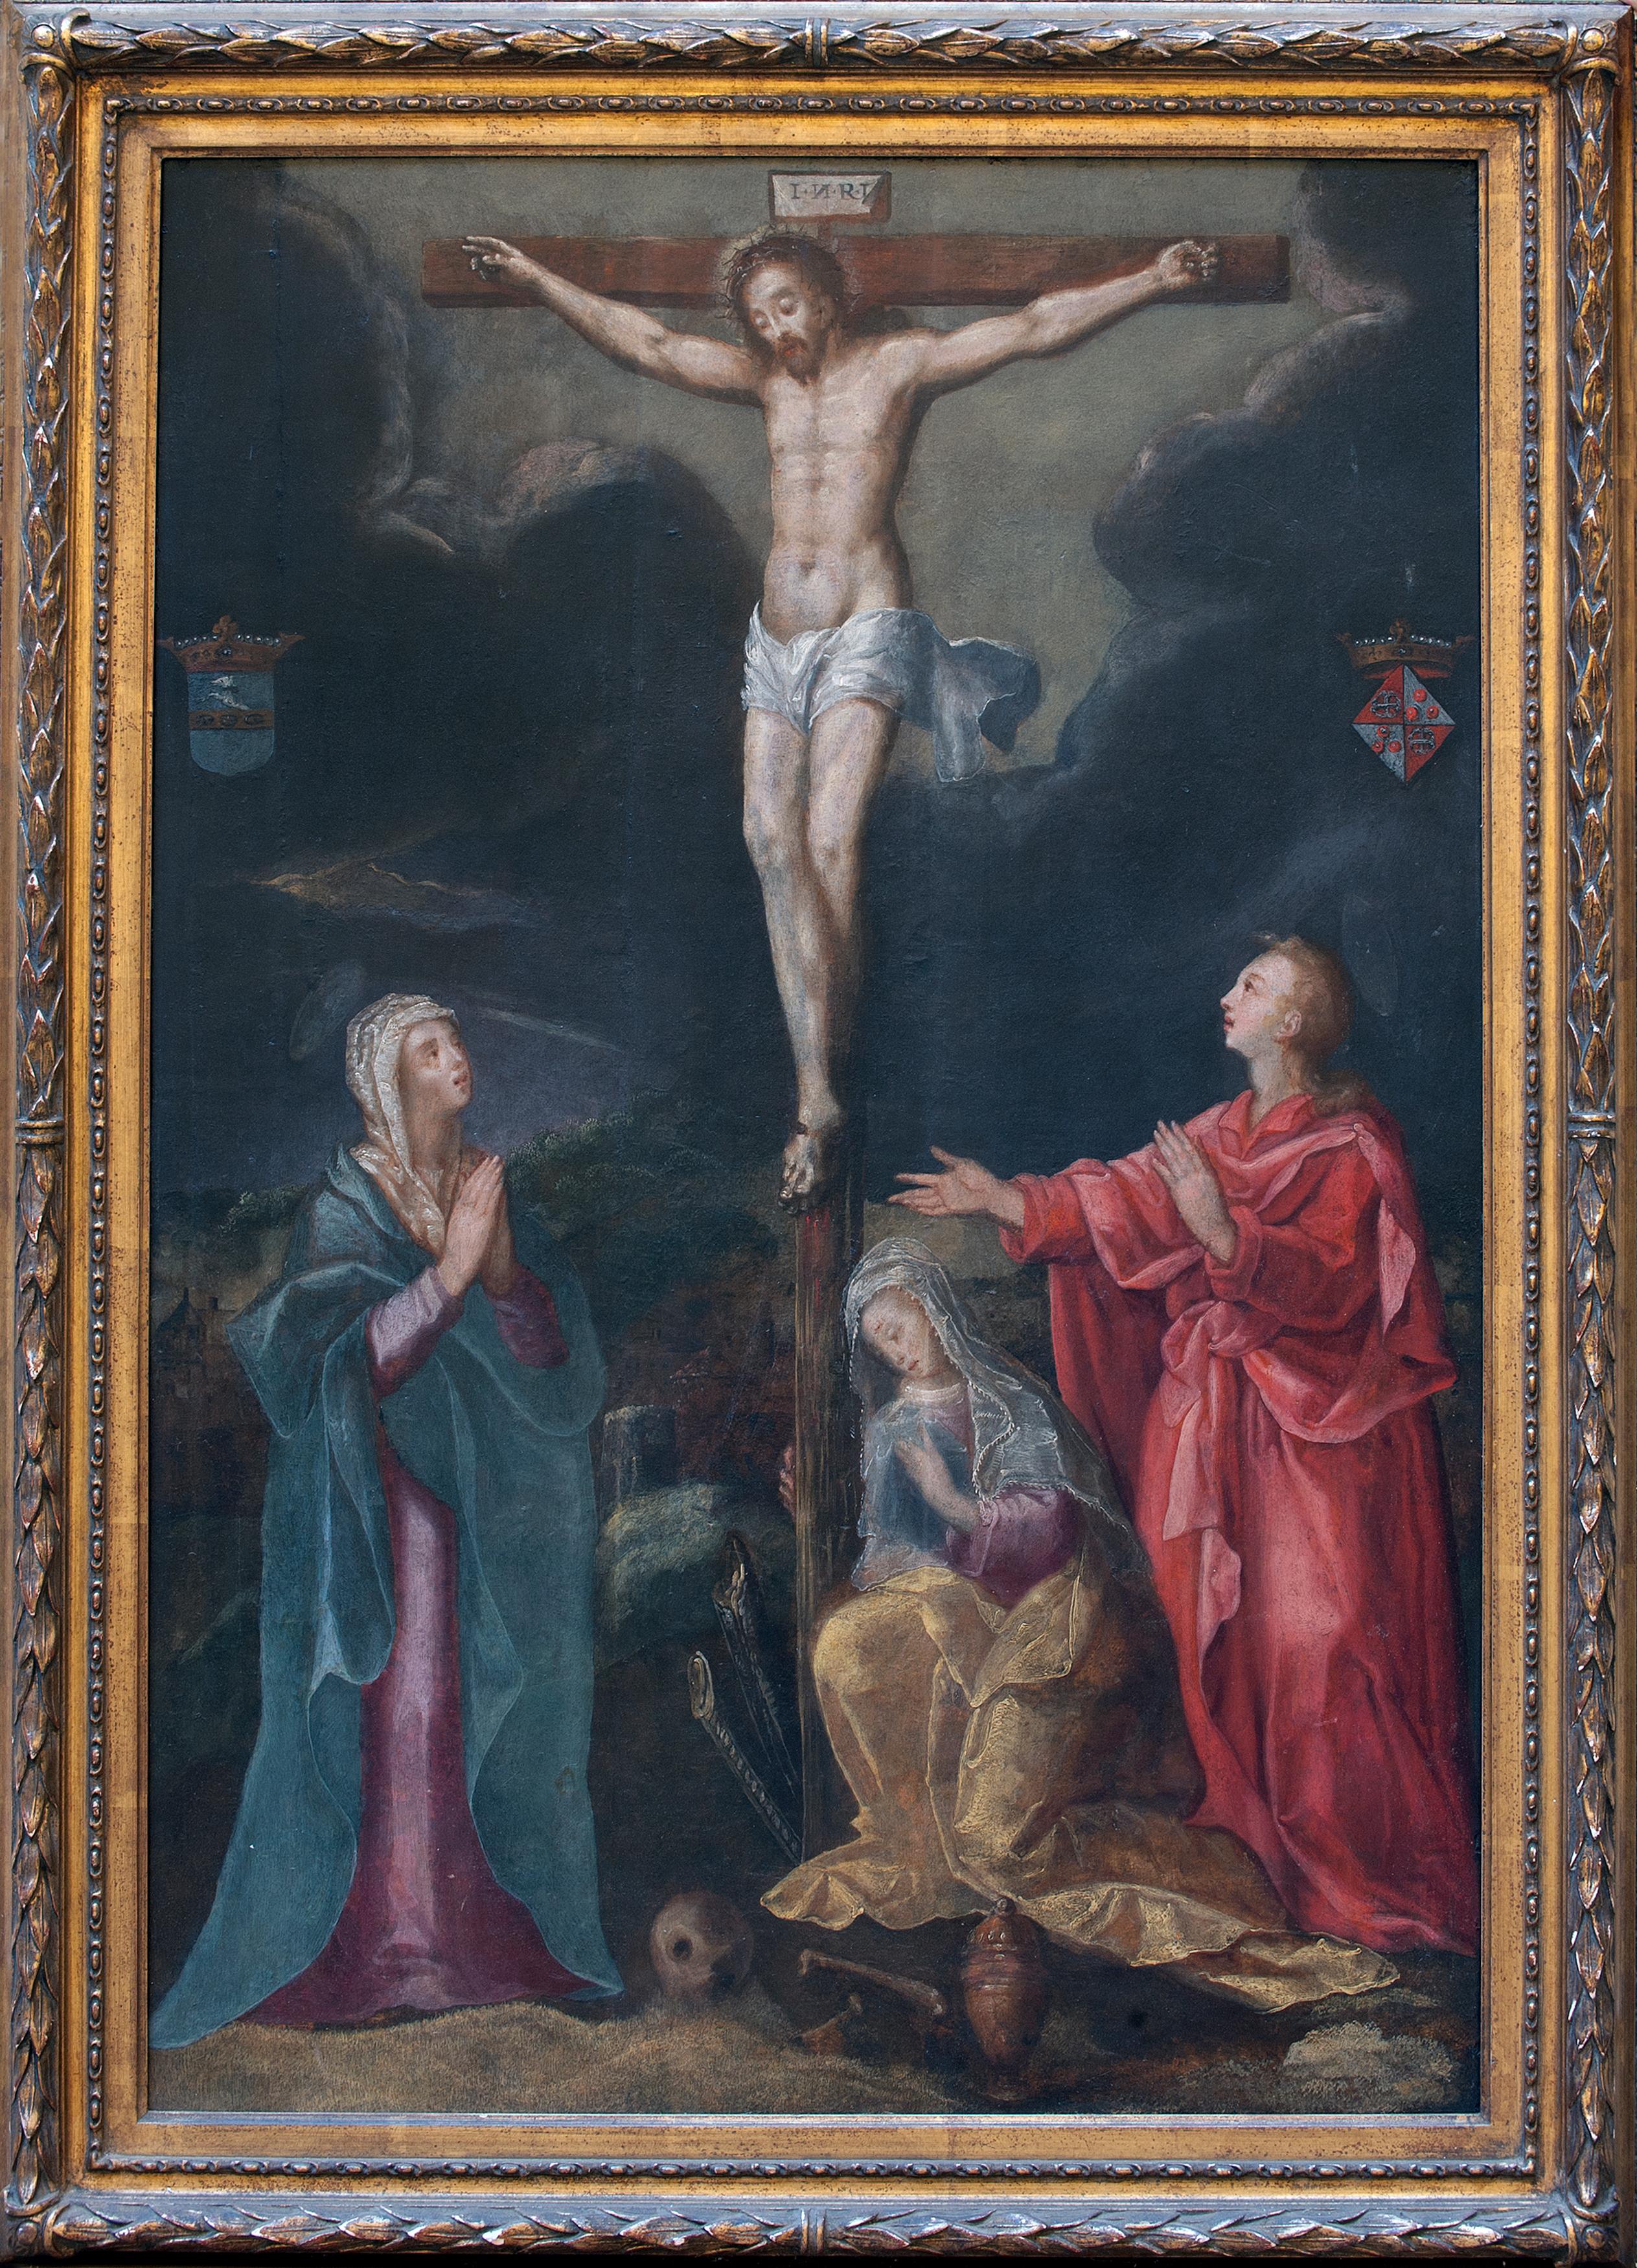 This antique and impressive oil on wood board represents a religious scene with the Crucifixion of Jesus with the Madonna, Magdalene, and St. John.
Stylistically linked to the Netherlands area during mid-16th century. 
Specifically to the painting